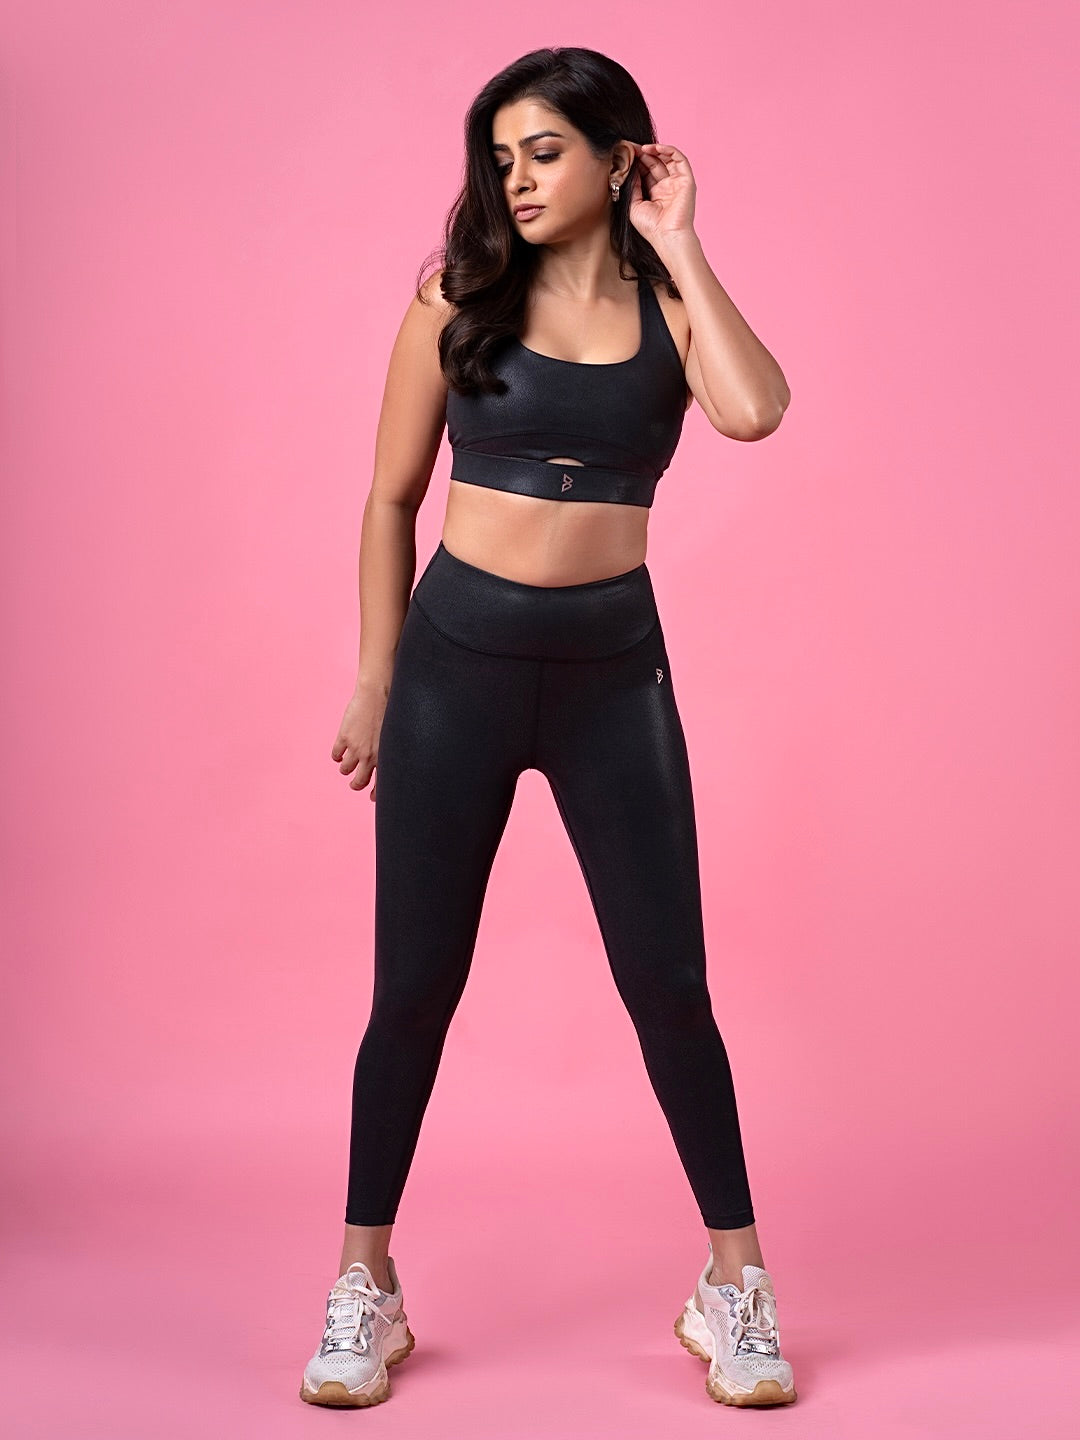 Tanya's Go To Black Essential Glossy Leggings BODD ACTIVE